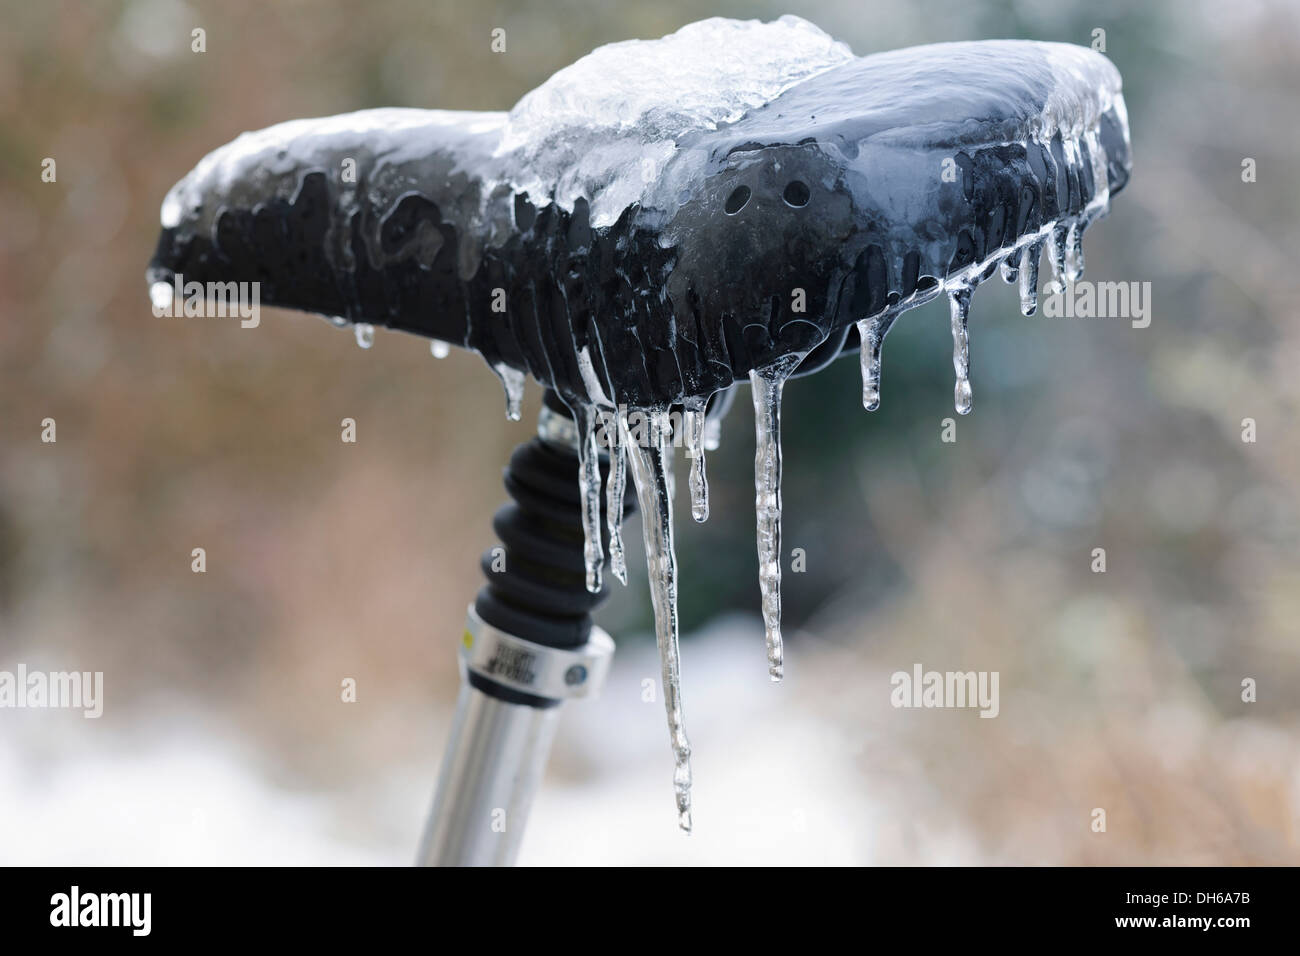 Icicles on a bicycle saddle after freezing rain, Emmendingen, Baden-Württemberg, Germany Stock Photo